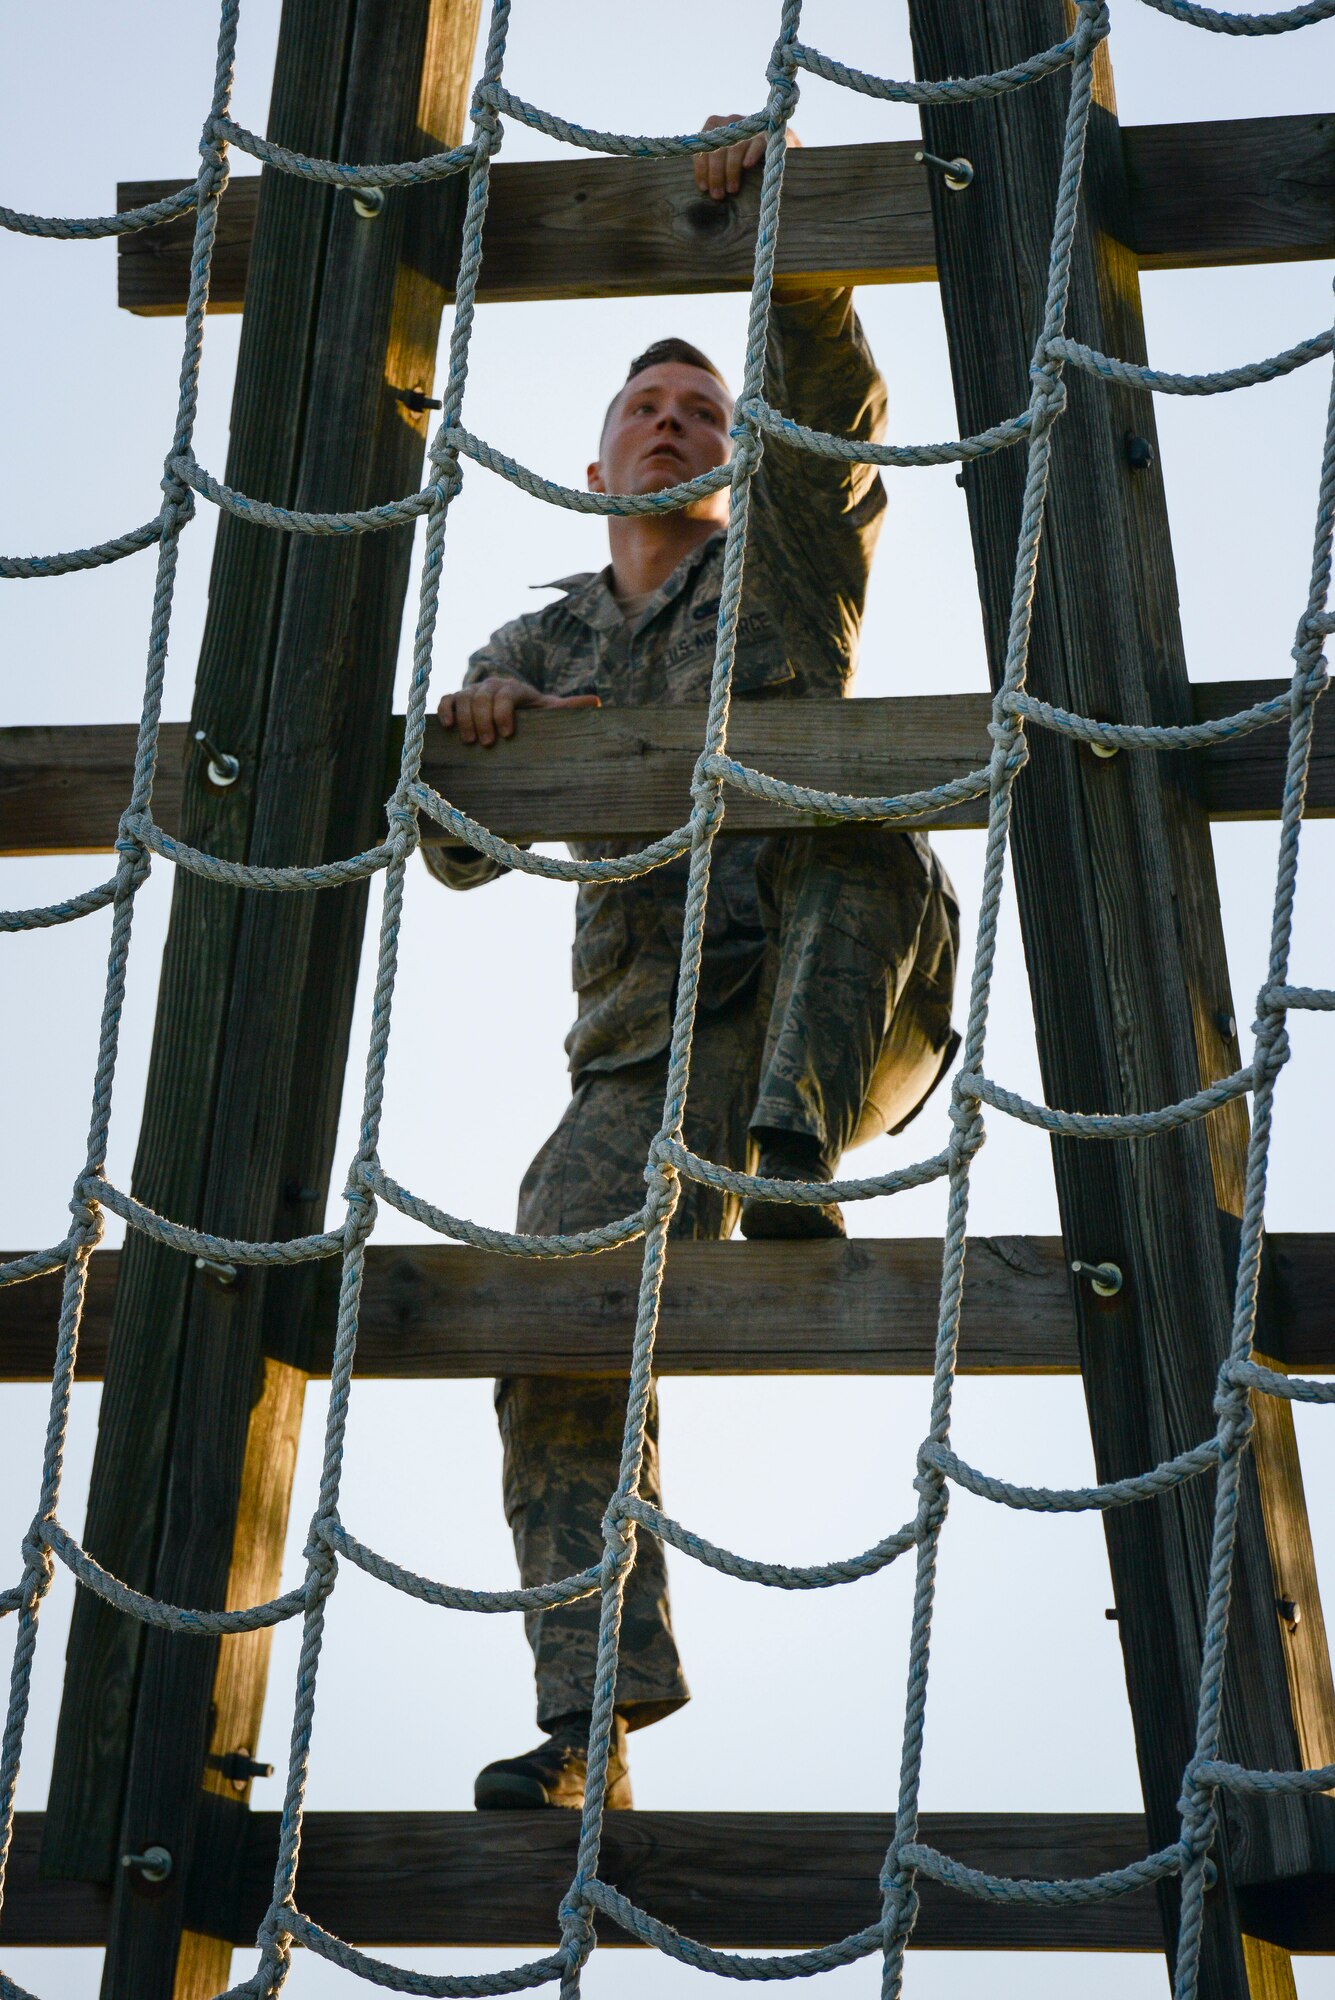 U.S. Air Force Senior Airman William McLaughlin, 502nd Security Forces Squadron, climbs an obstacle during the Air Education and Training Command’s Defender Challenge team selection July 23, 2018, at Joint Base San Antonio-Medina Annex, Texas. Defender Challenge is a Security Forces competition that pits teams against each other in realistic weapons, dismounted operations and relay challenge events.